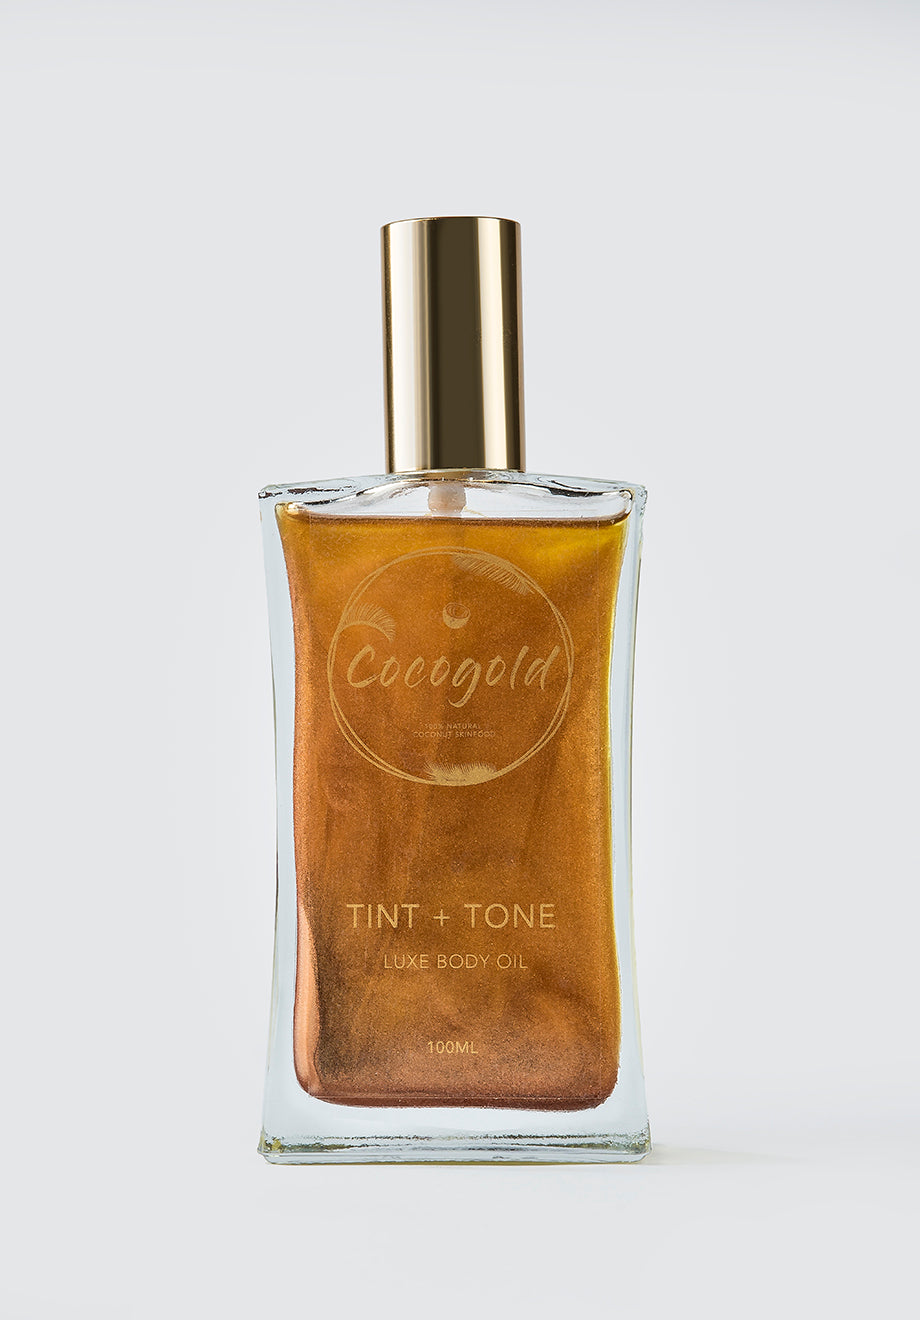 Cocogold Tint + Tone Luxe Body Oil